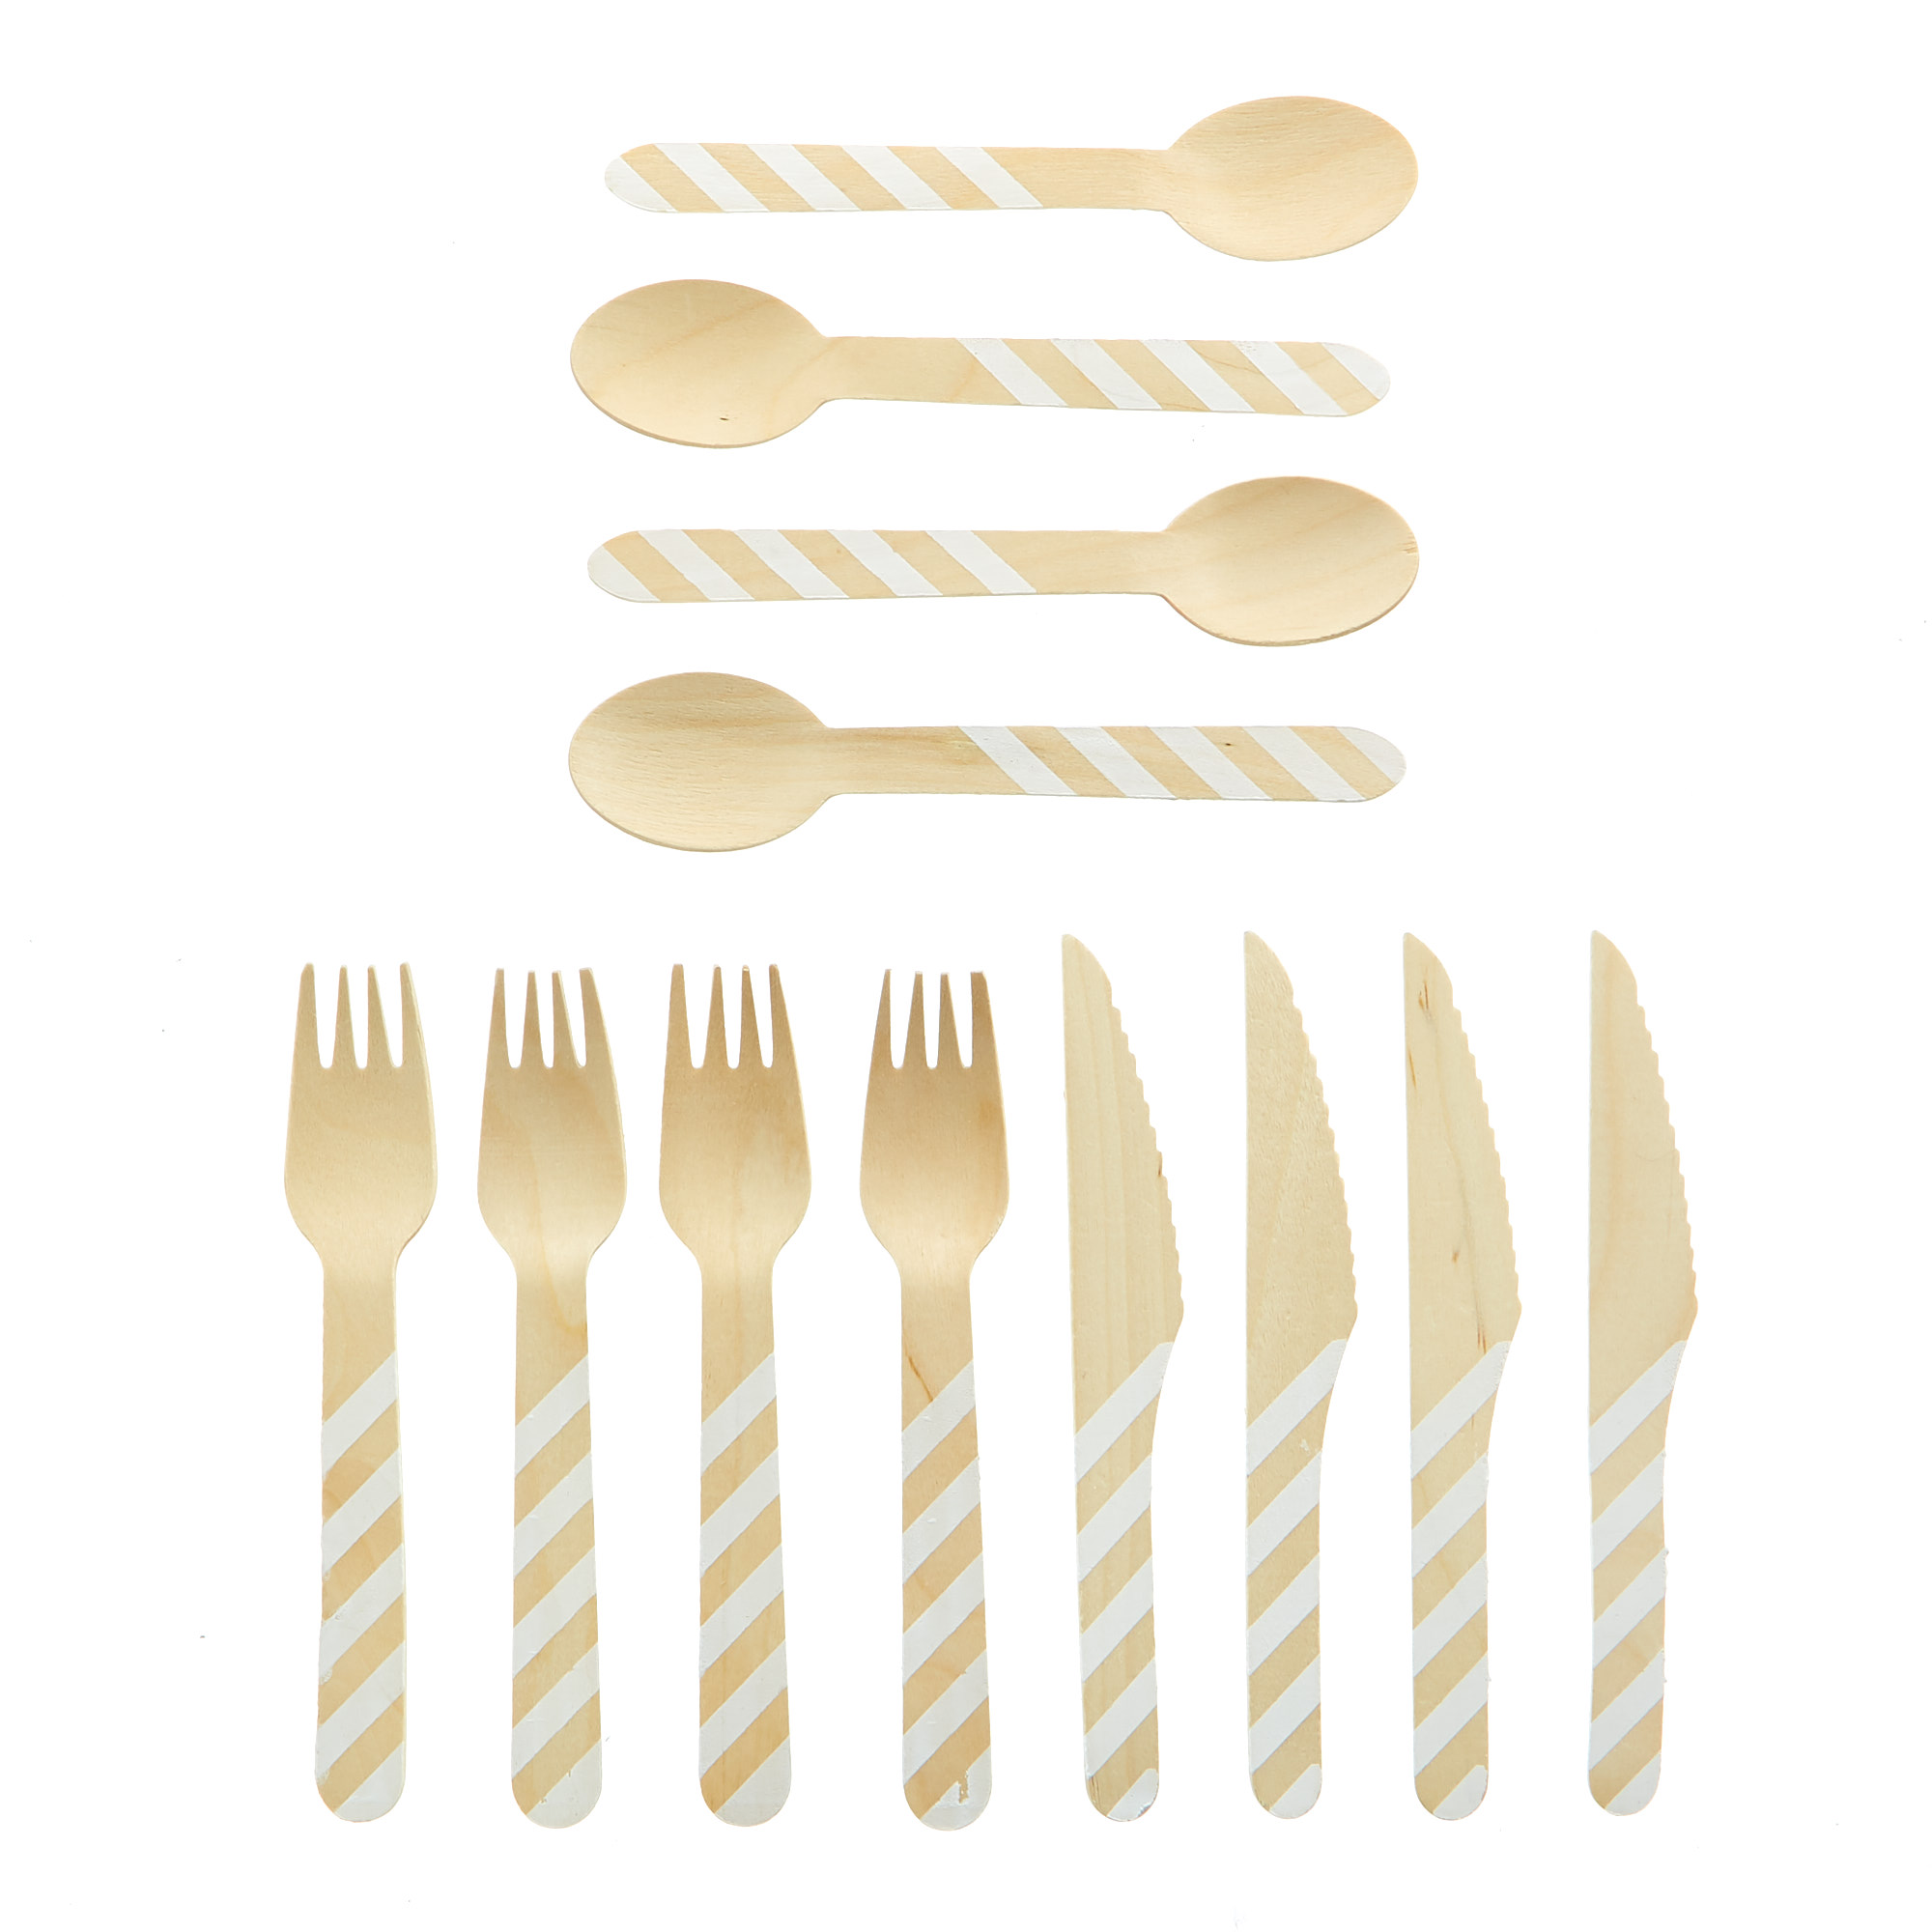 Disposable Wooden Cutlery - 4 Spoons, Knives & Forks